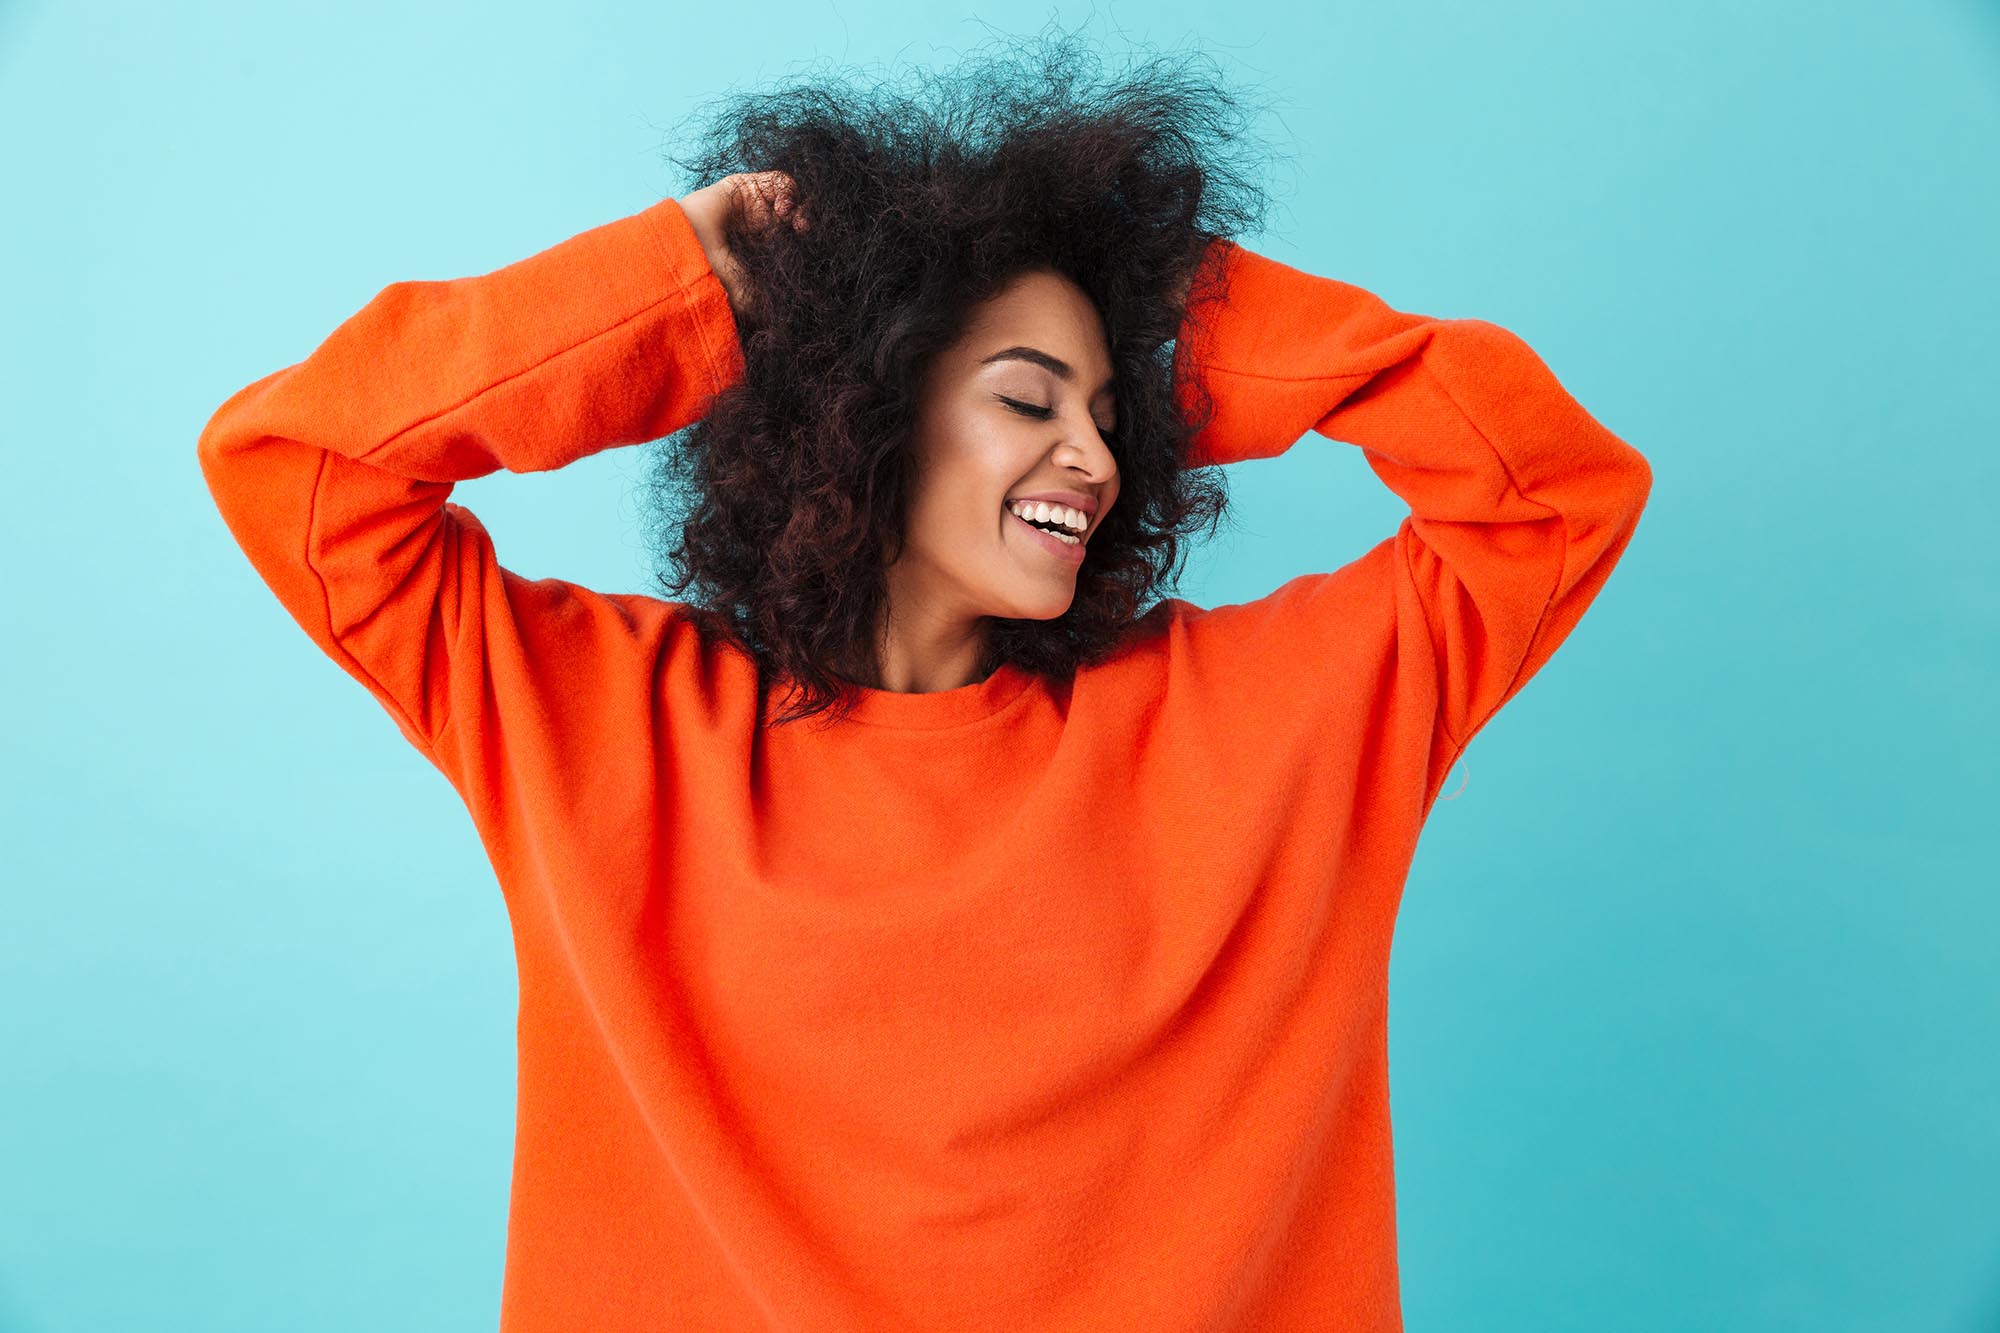 Colorful portrait of smiling woman in orange shirt looking aside and touching her dark curly hair on blue background